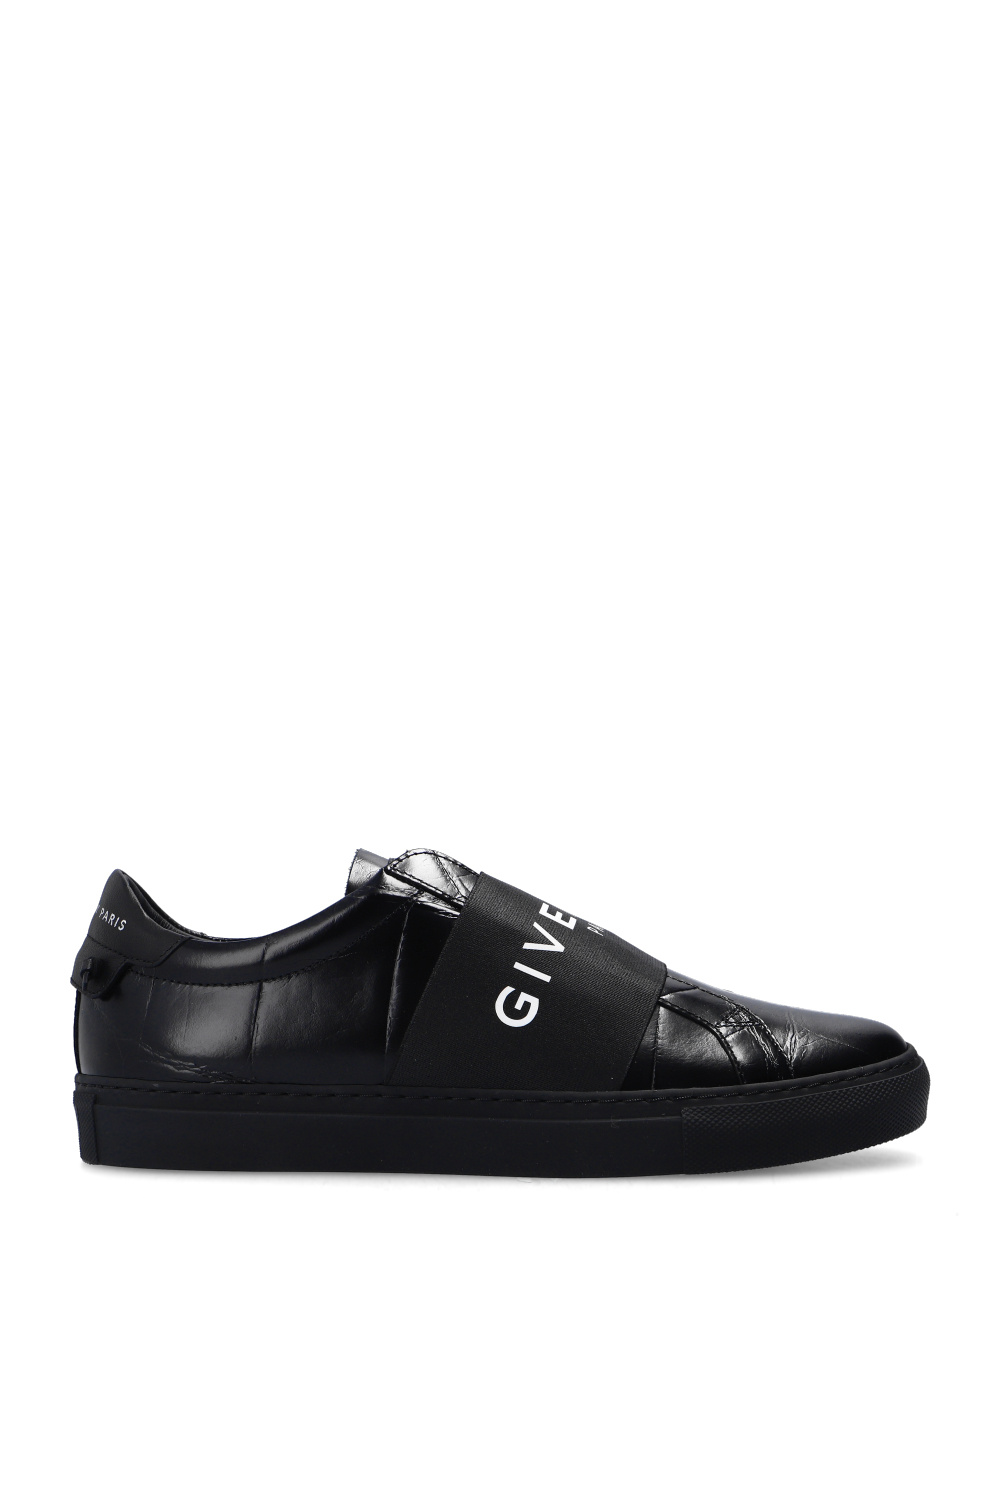 givenchy short-sleeve ‘Urban Street’ sneakers with logo